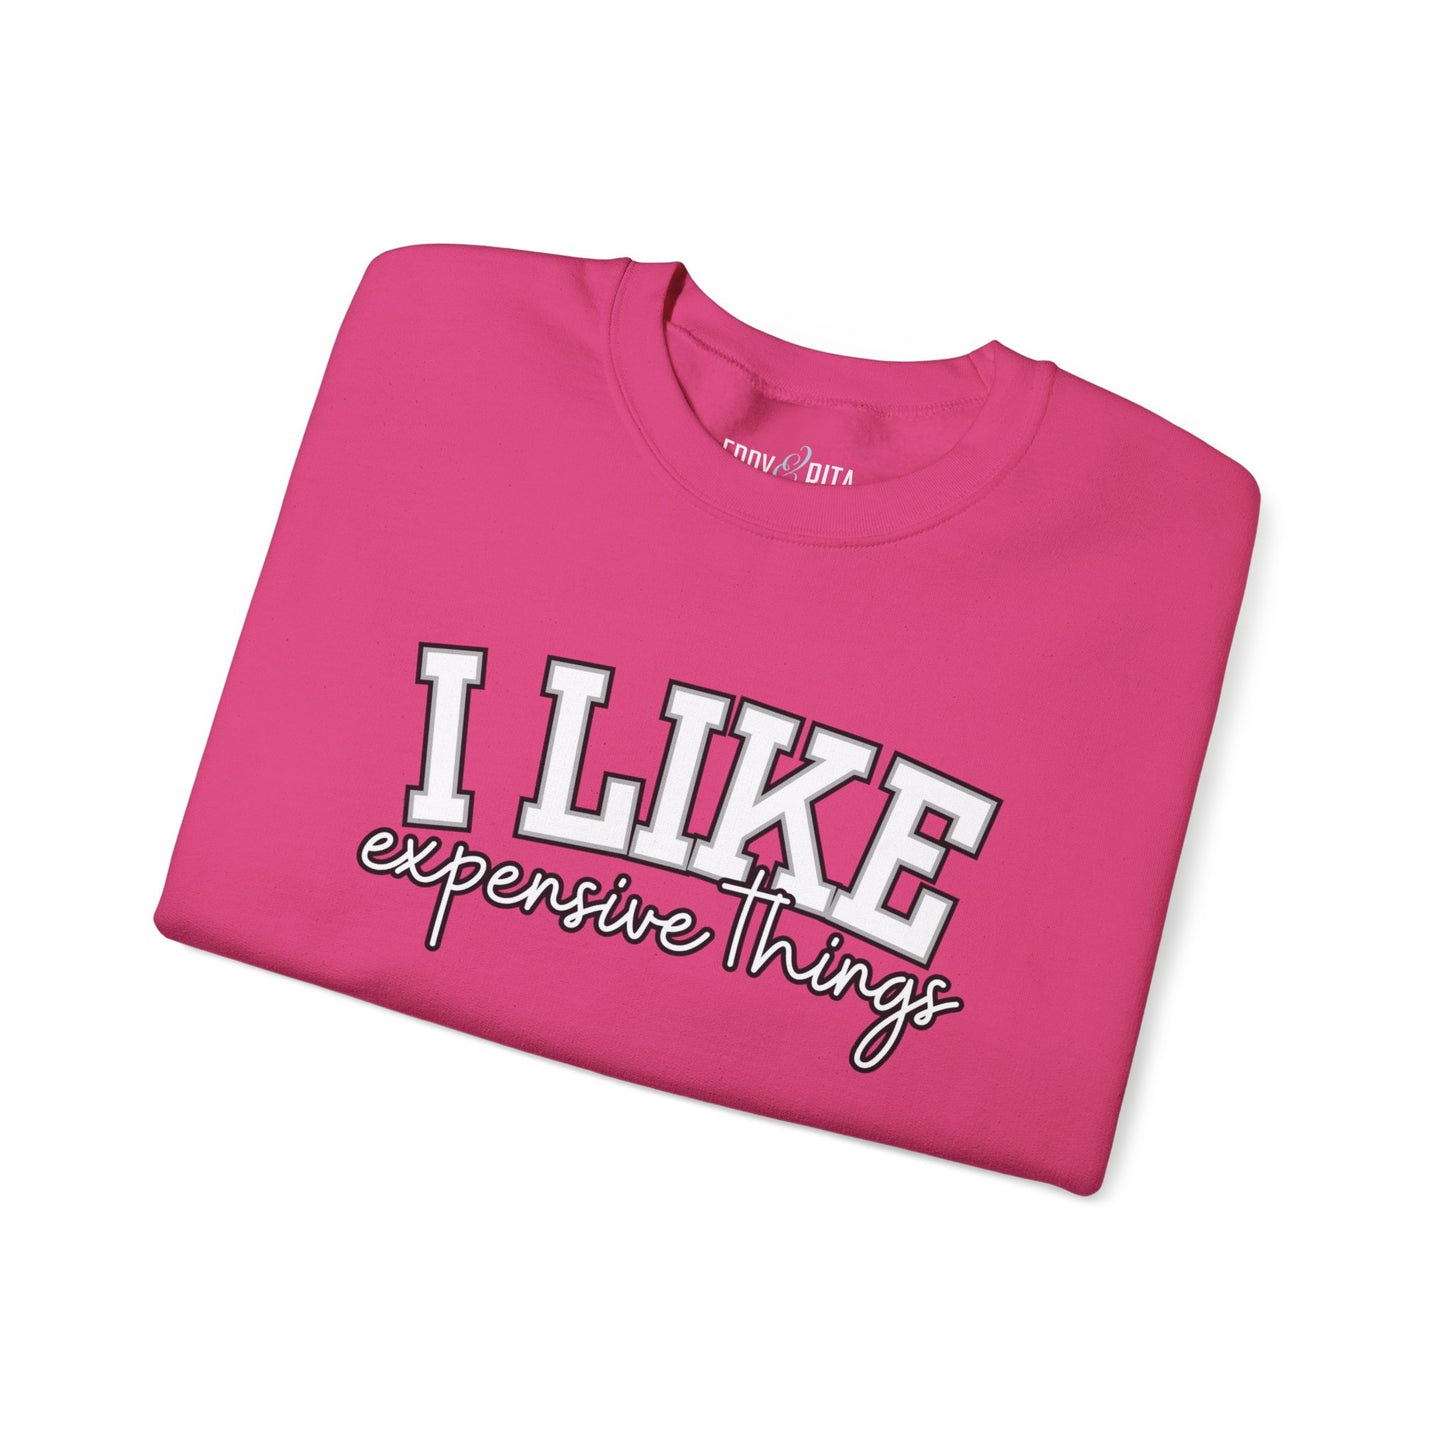 Women's Sweatshirt - 'I Like Expensive Things' - Luxe Comfort and Chic Style for Fashion-Forward Elegance